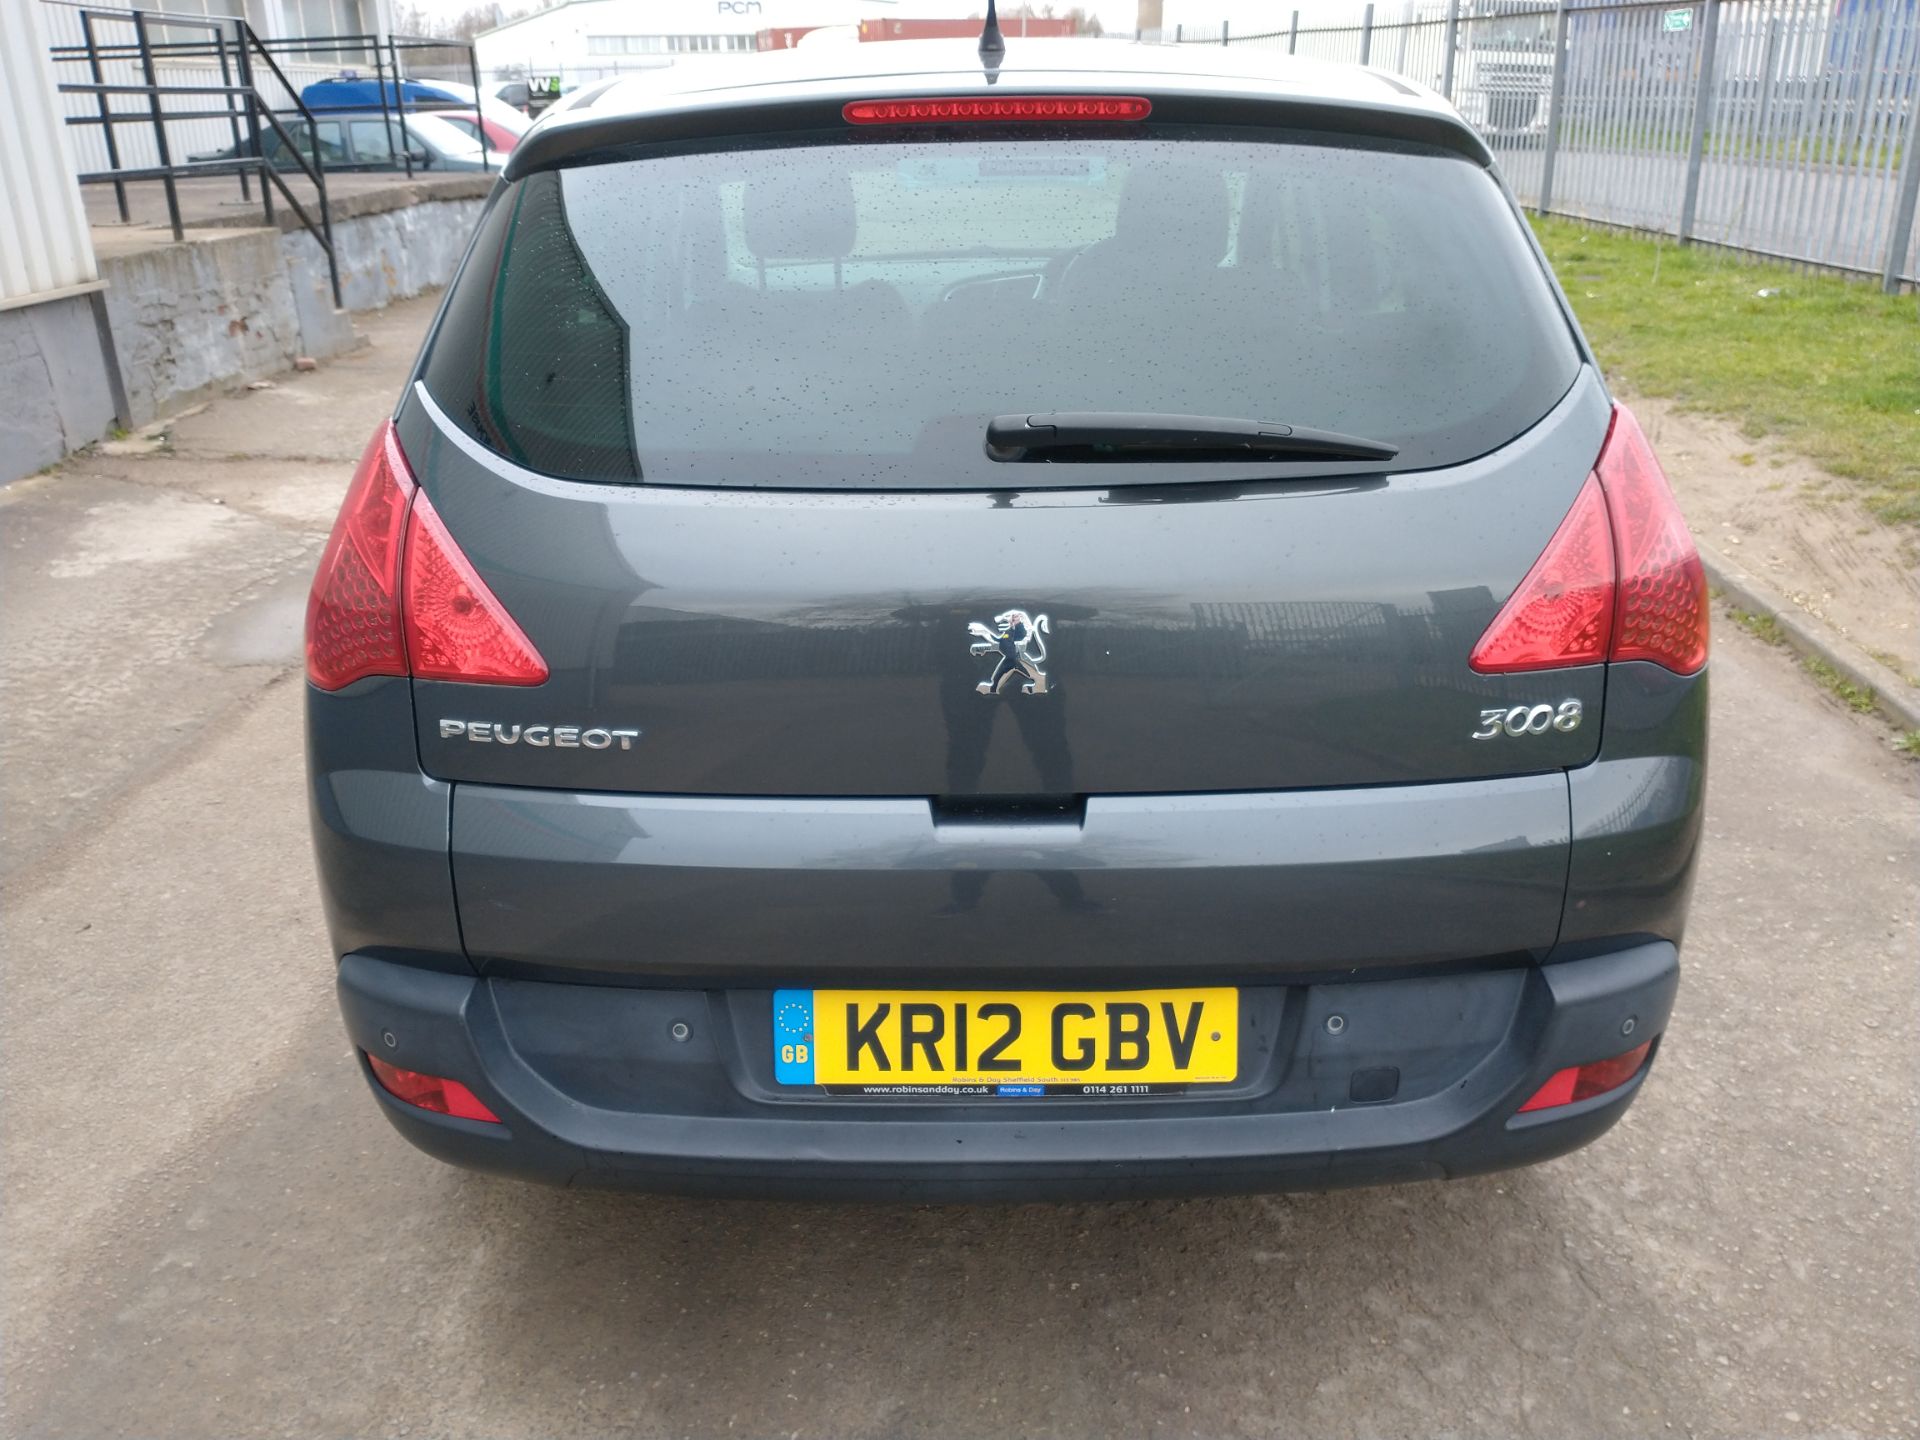 2012 Peugeot 3008 Active HDI 1.6 5DR SUV - CL505 - NO VAT ON THE HAMM - Image 15 of 19